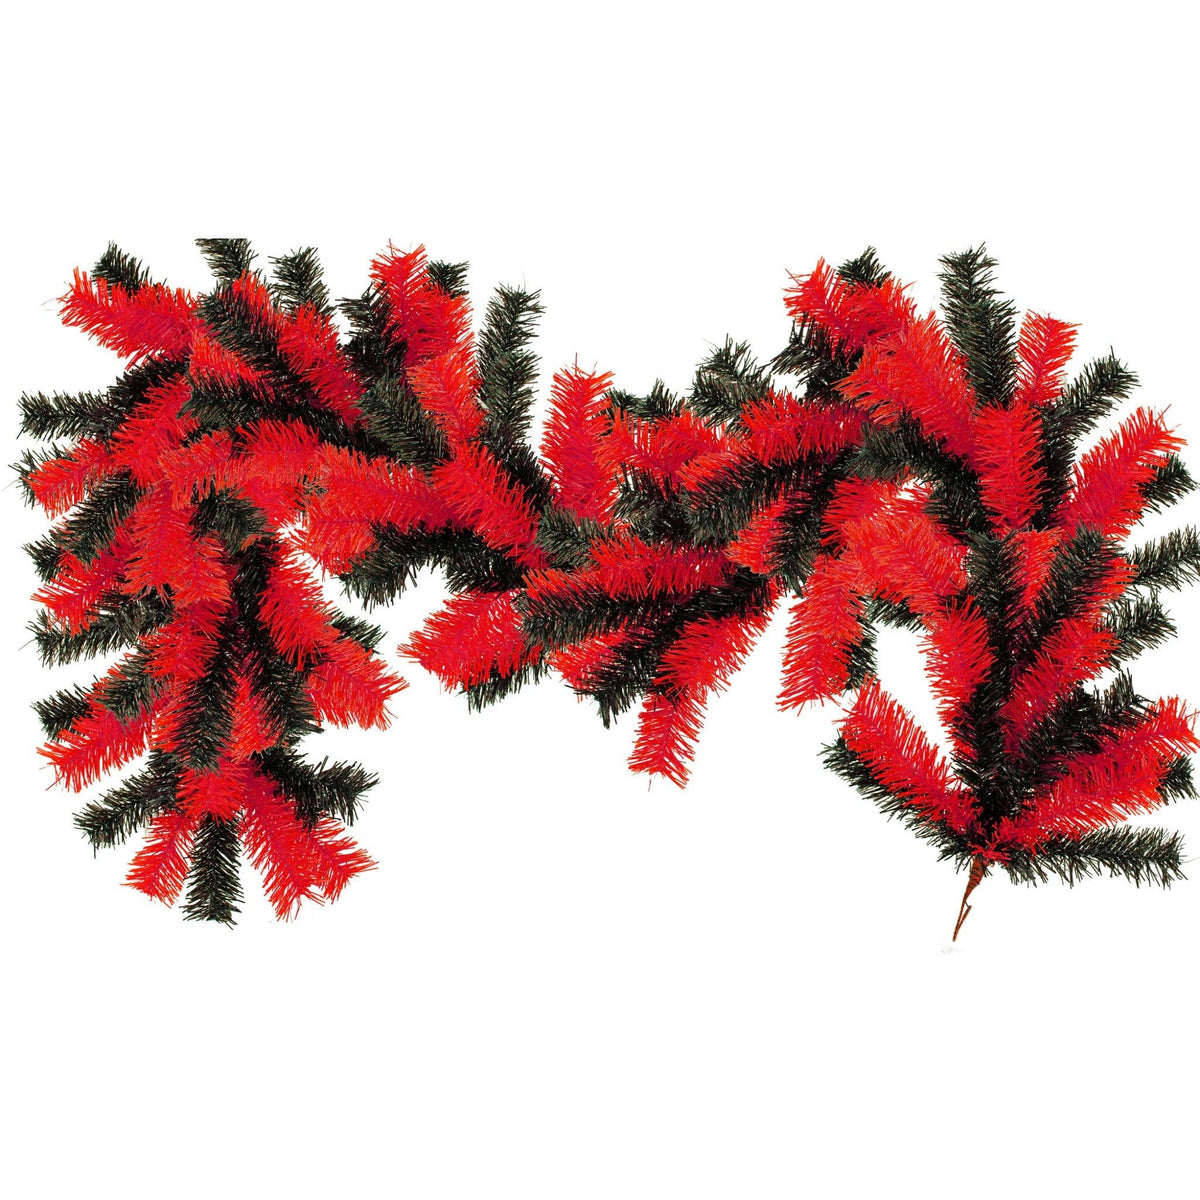 Shop for Lee Display's brand new 6FT Shiny Metallic Red and Black Tinsel Brush Garlands on sale now at leedisplay.com.  